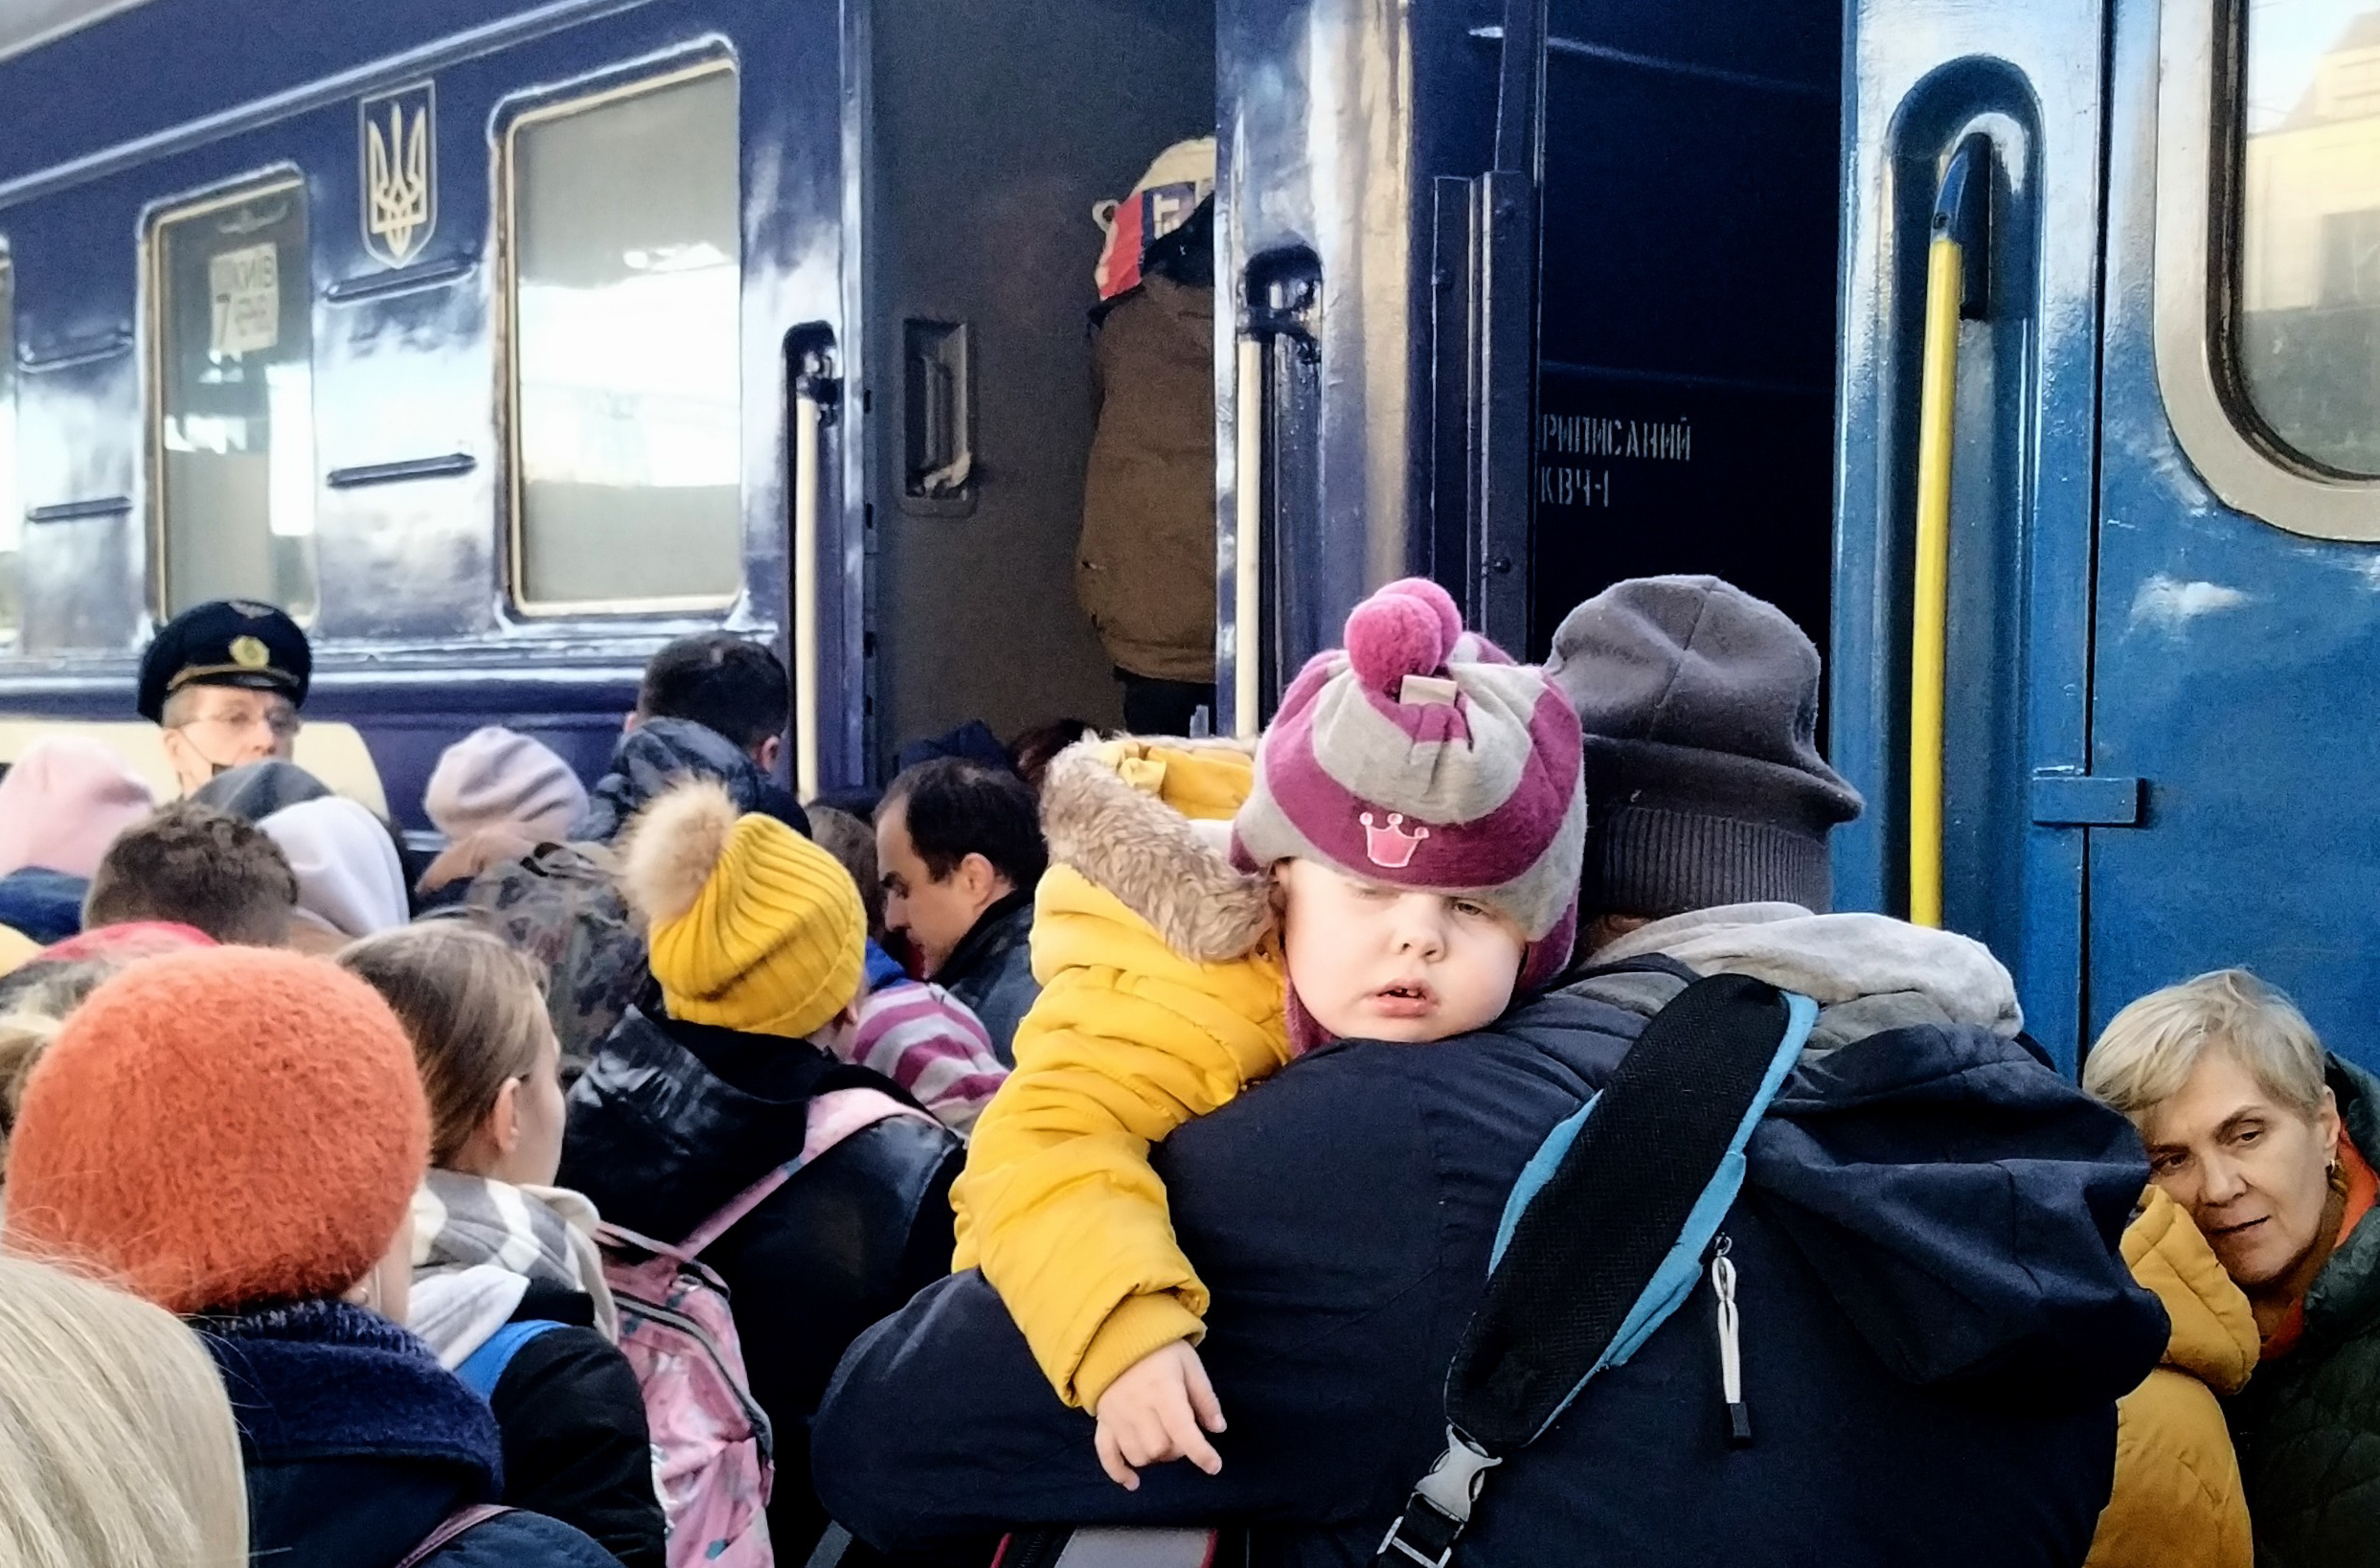 A man holds a baby among a crowd boarding a train